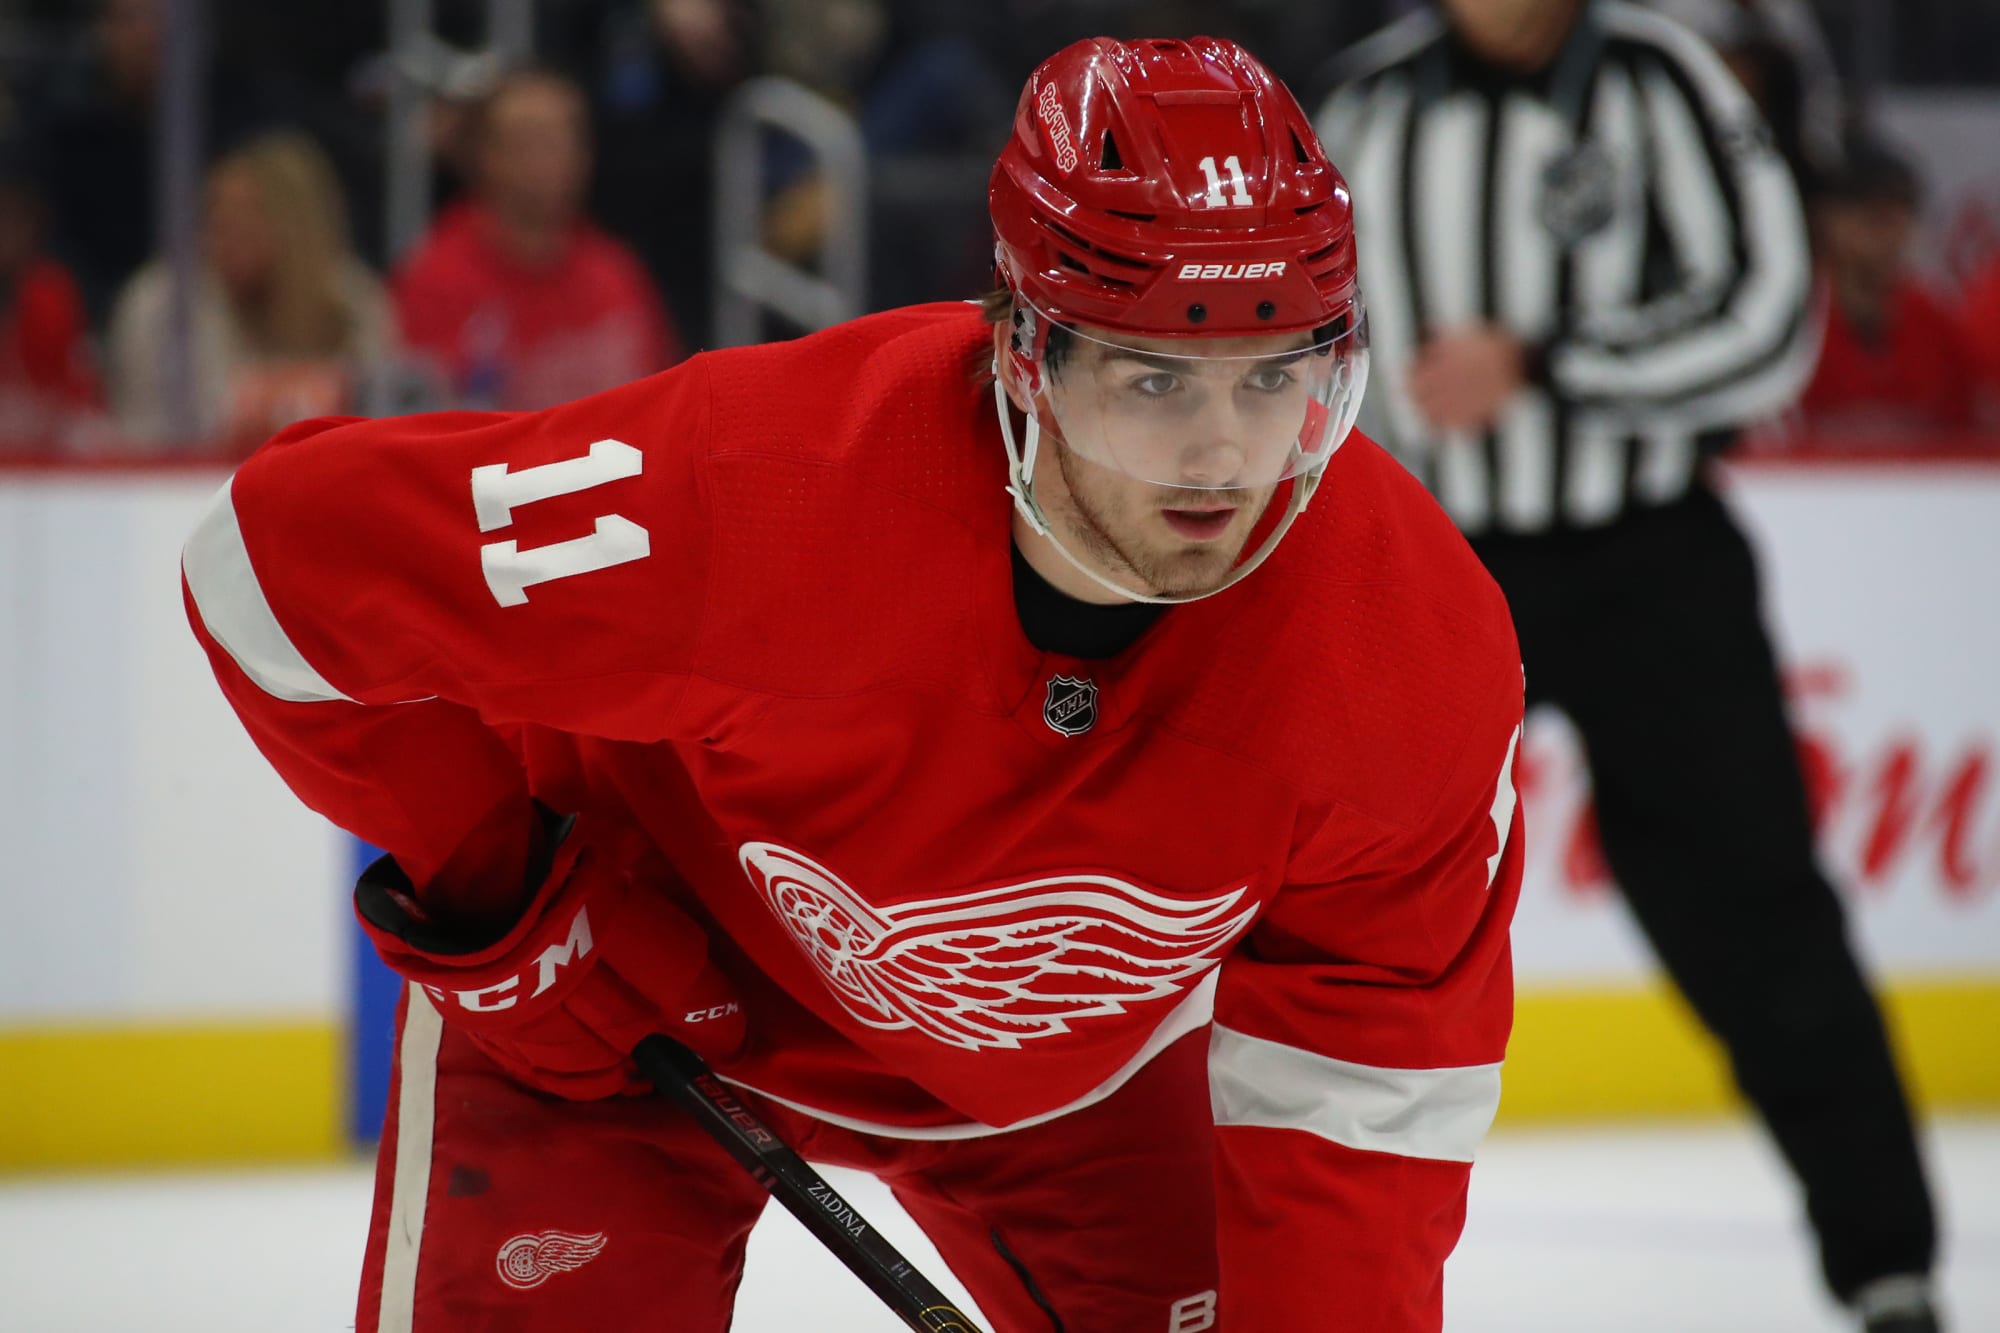 Detroit Red Wings: 3 forwards ready to breakout in 2021